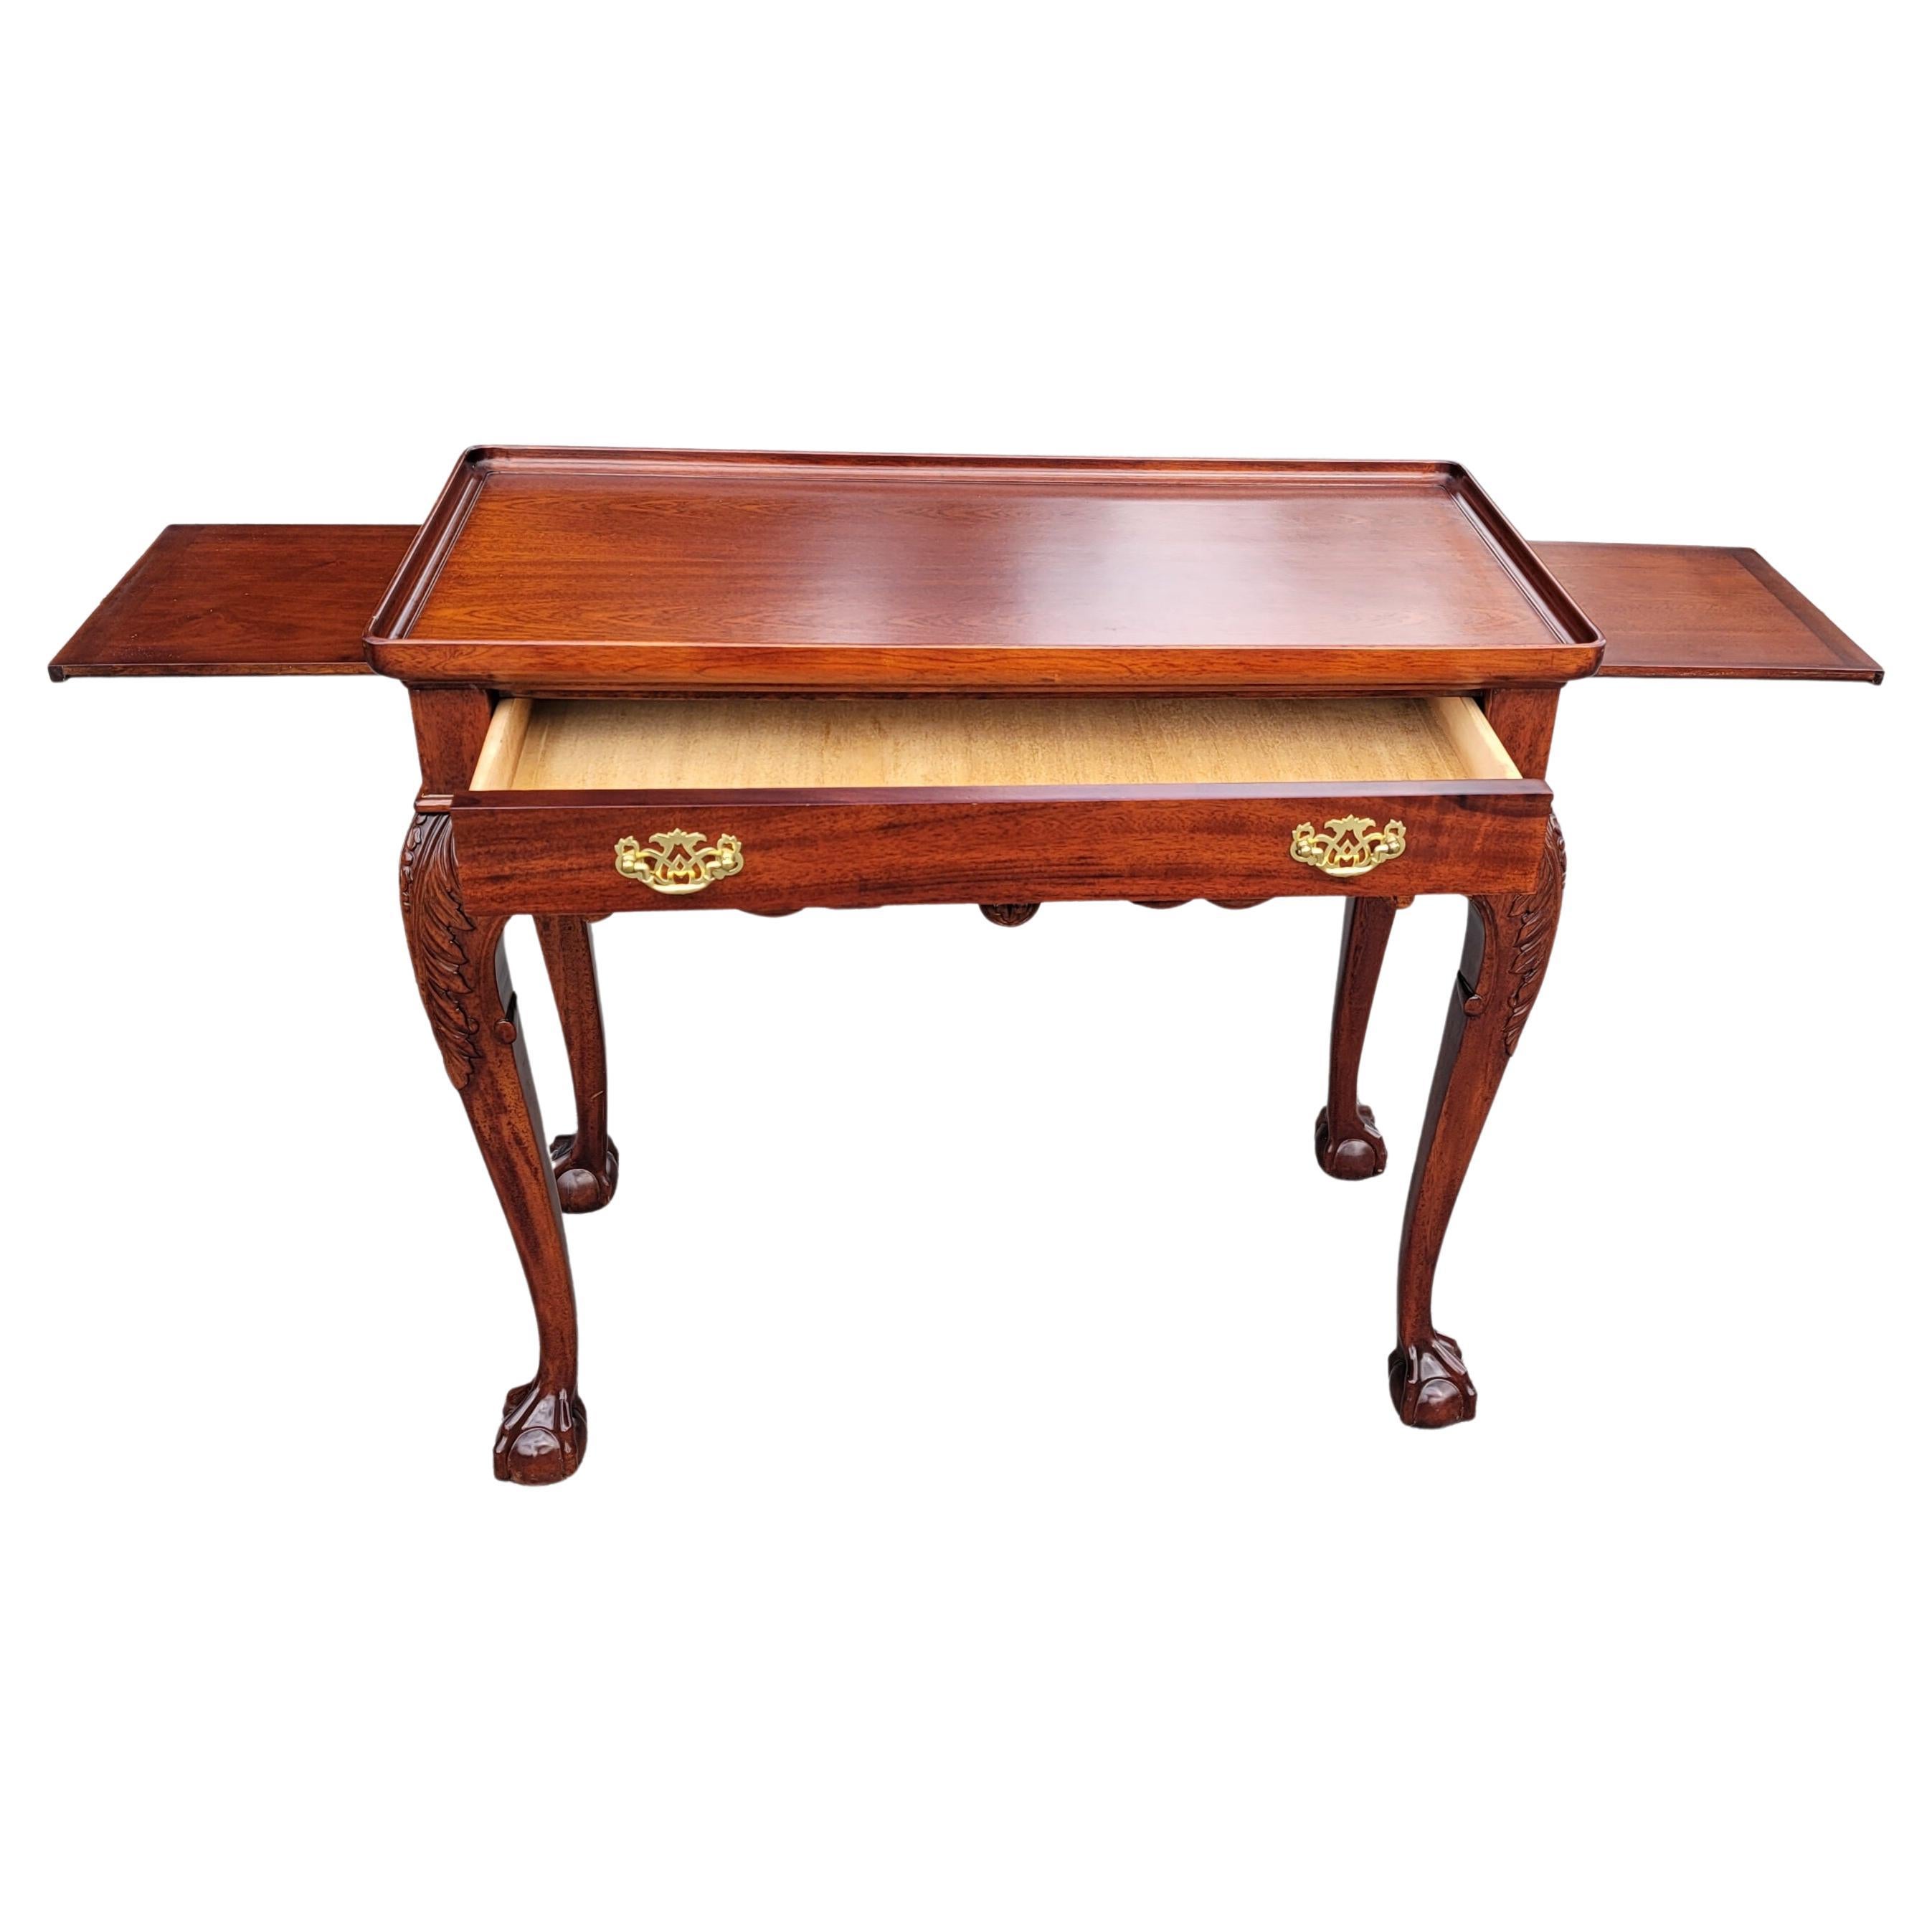 20th Century Ball & Claw Chippendale Mahogany Server Console  with Gallery and Pull-out Trays For Sale